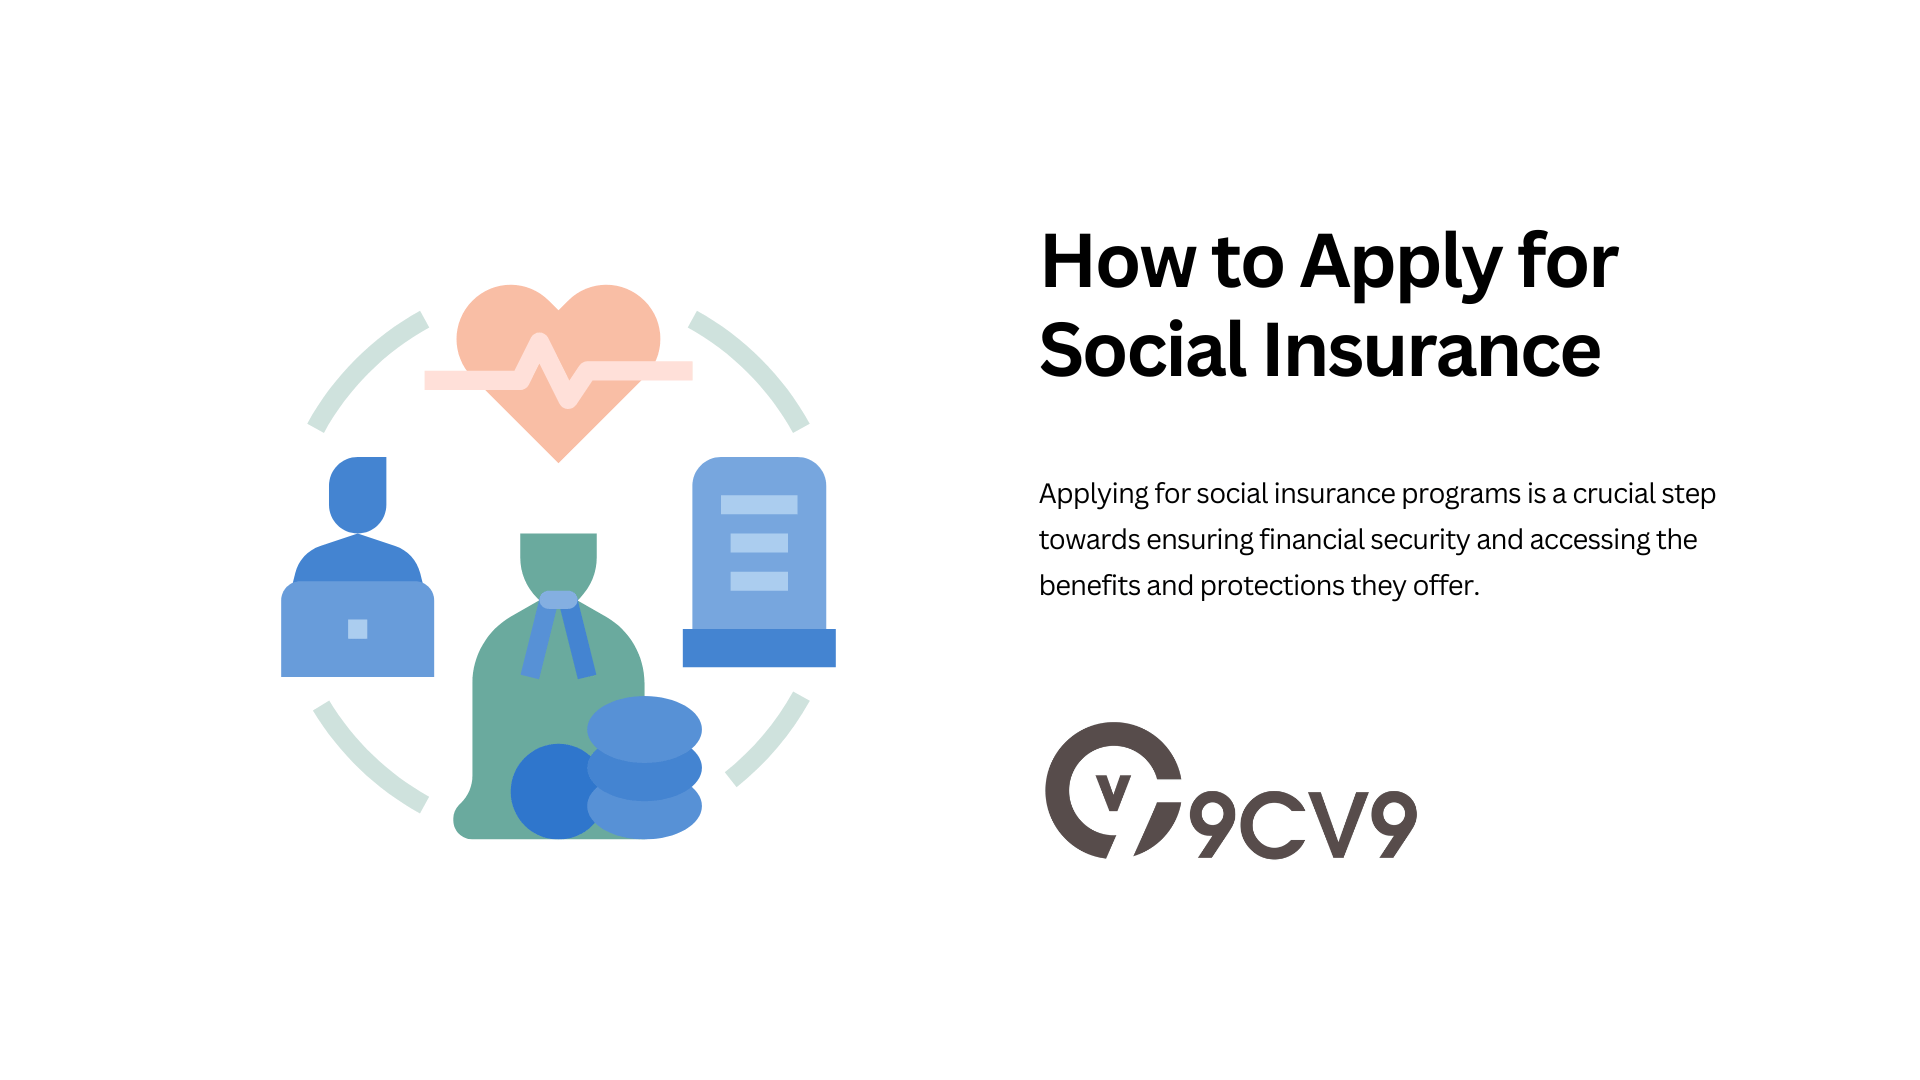 How to Apply for Social Insurance